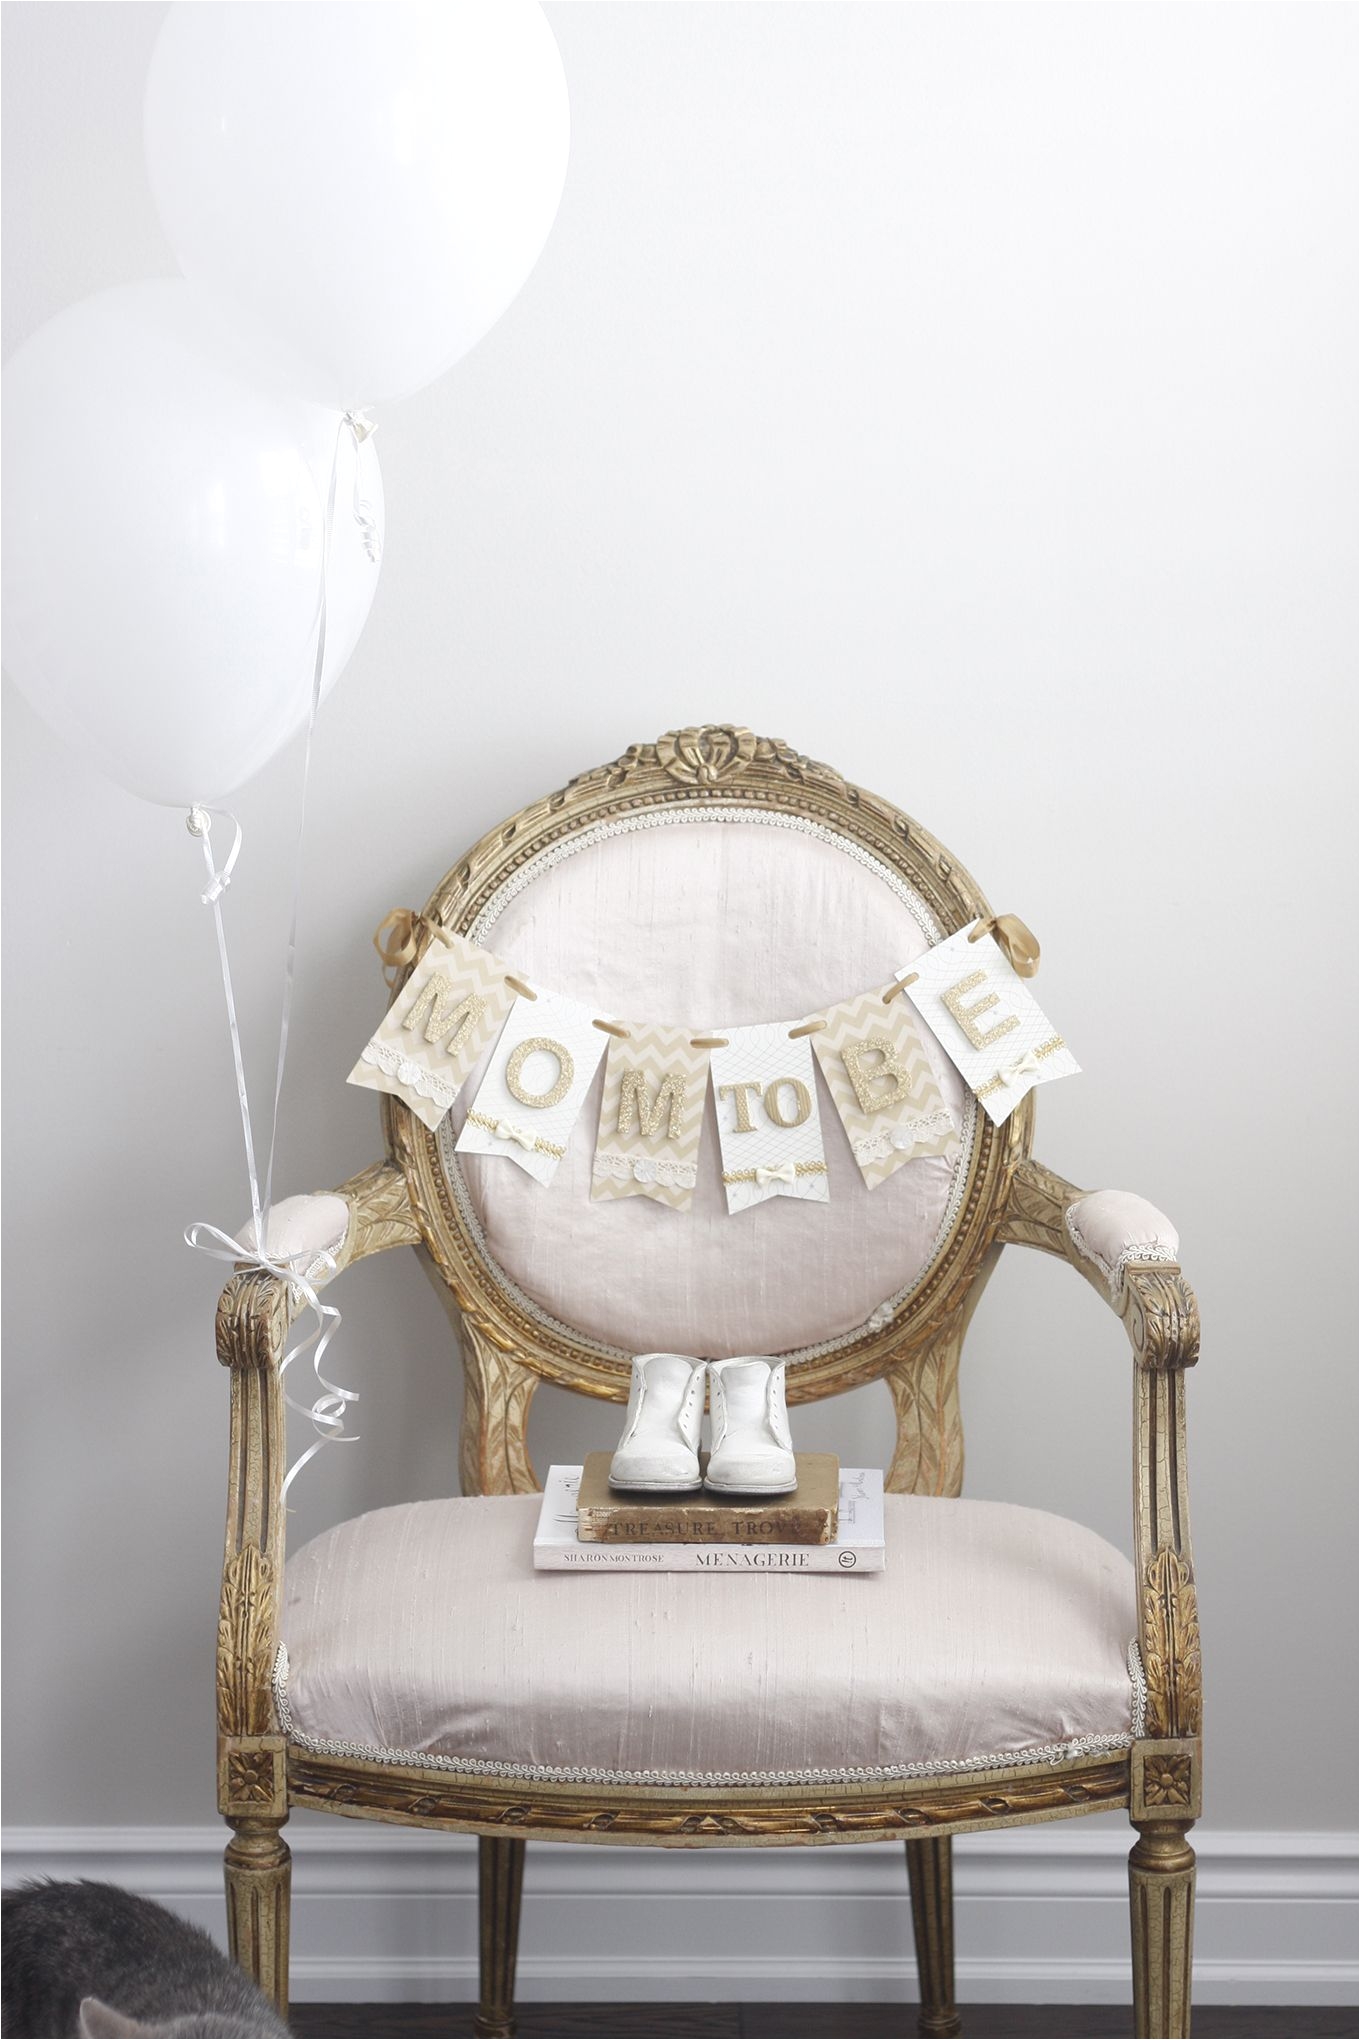 mom to be chair banner decor for baby shower by paige smith designs